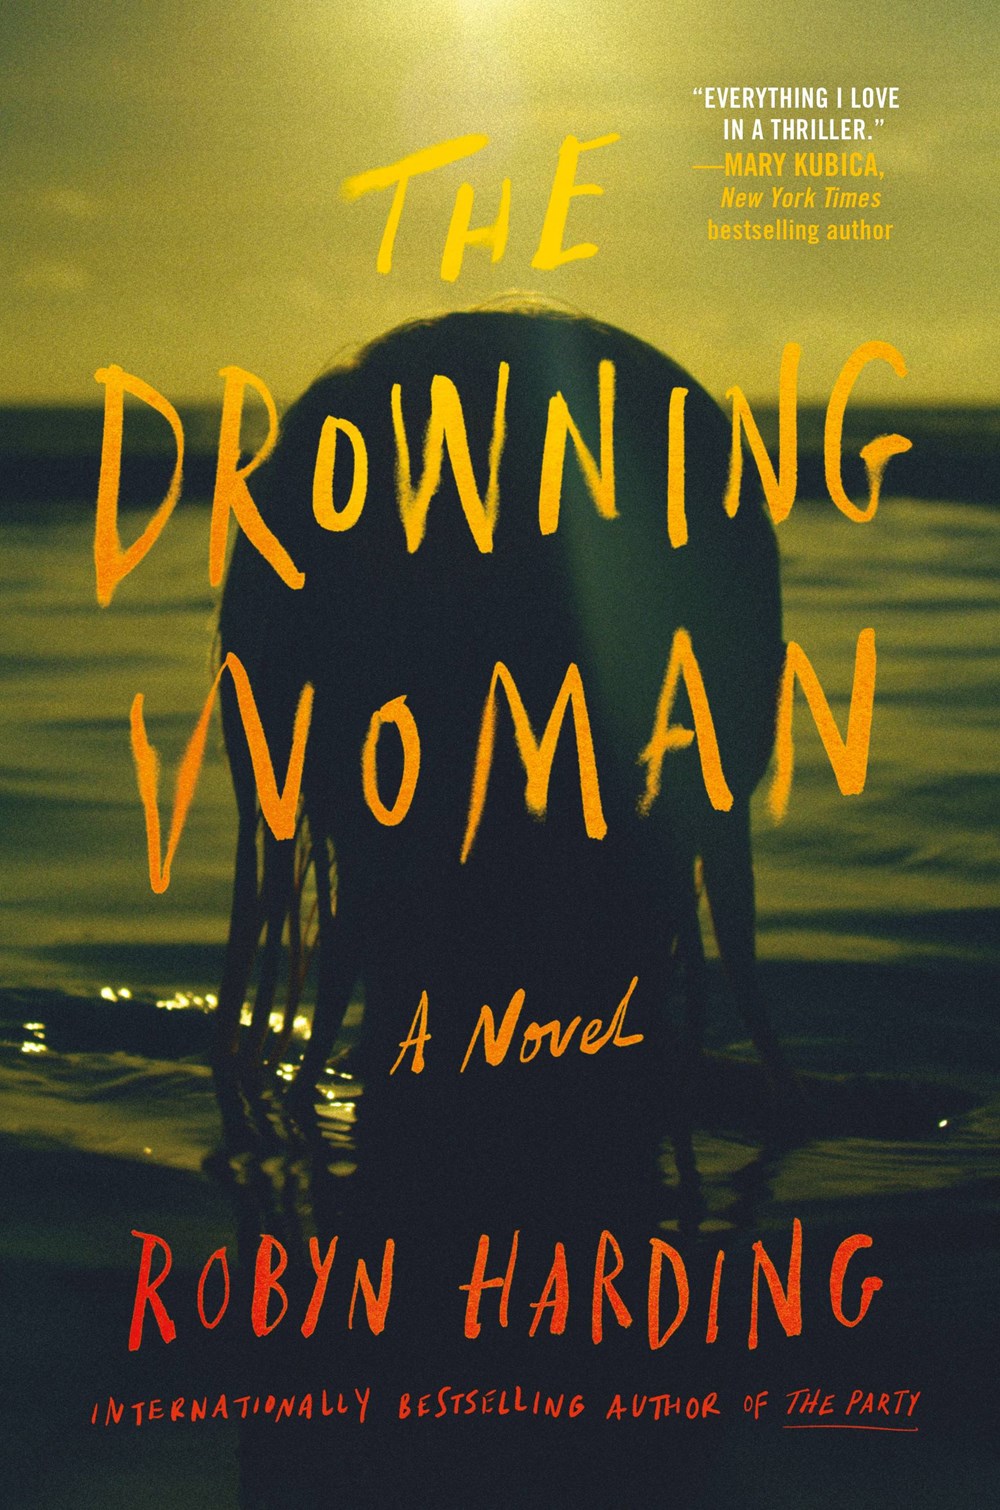 Spoiler Alert! The Drowning Woman by Robyn Harding